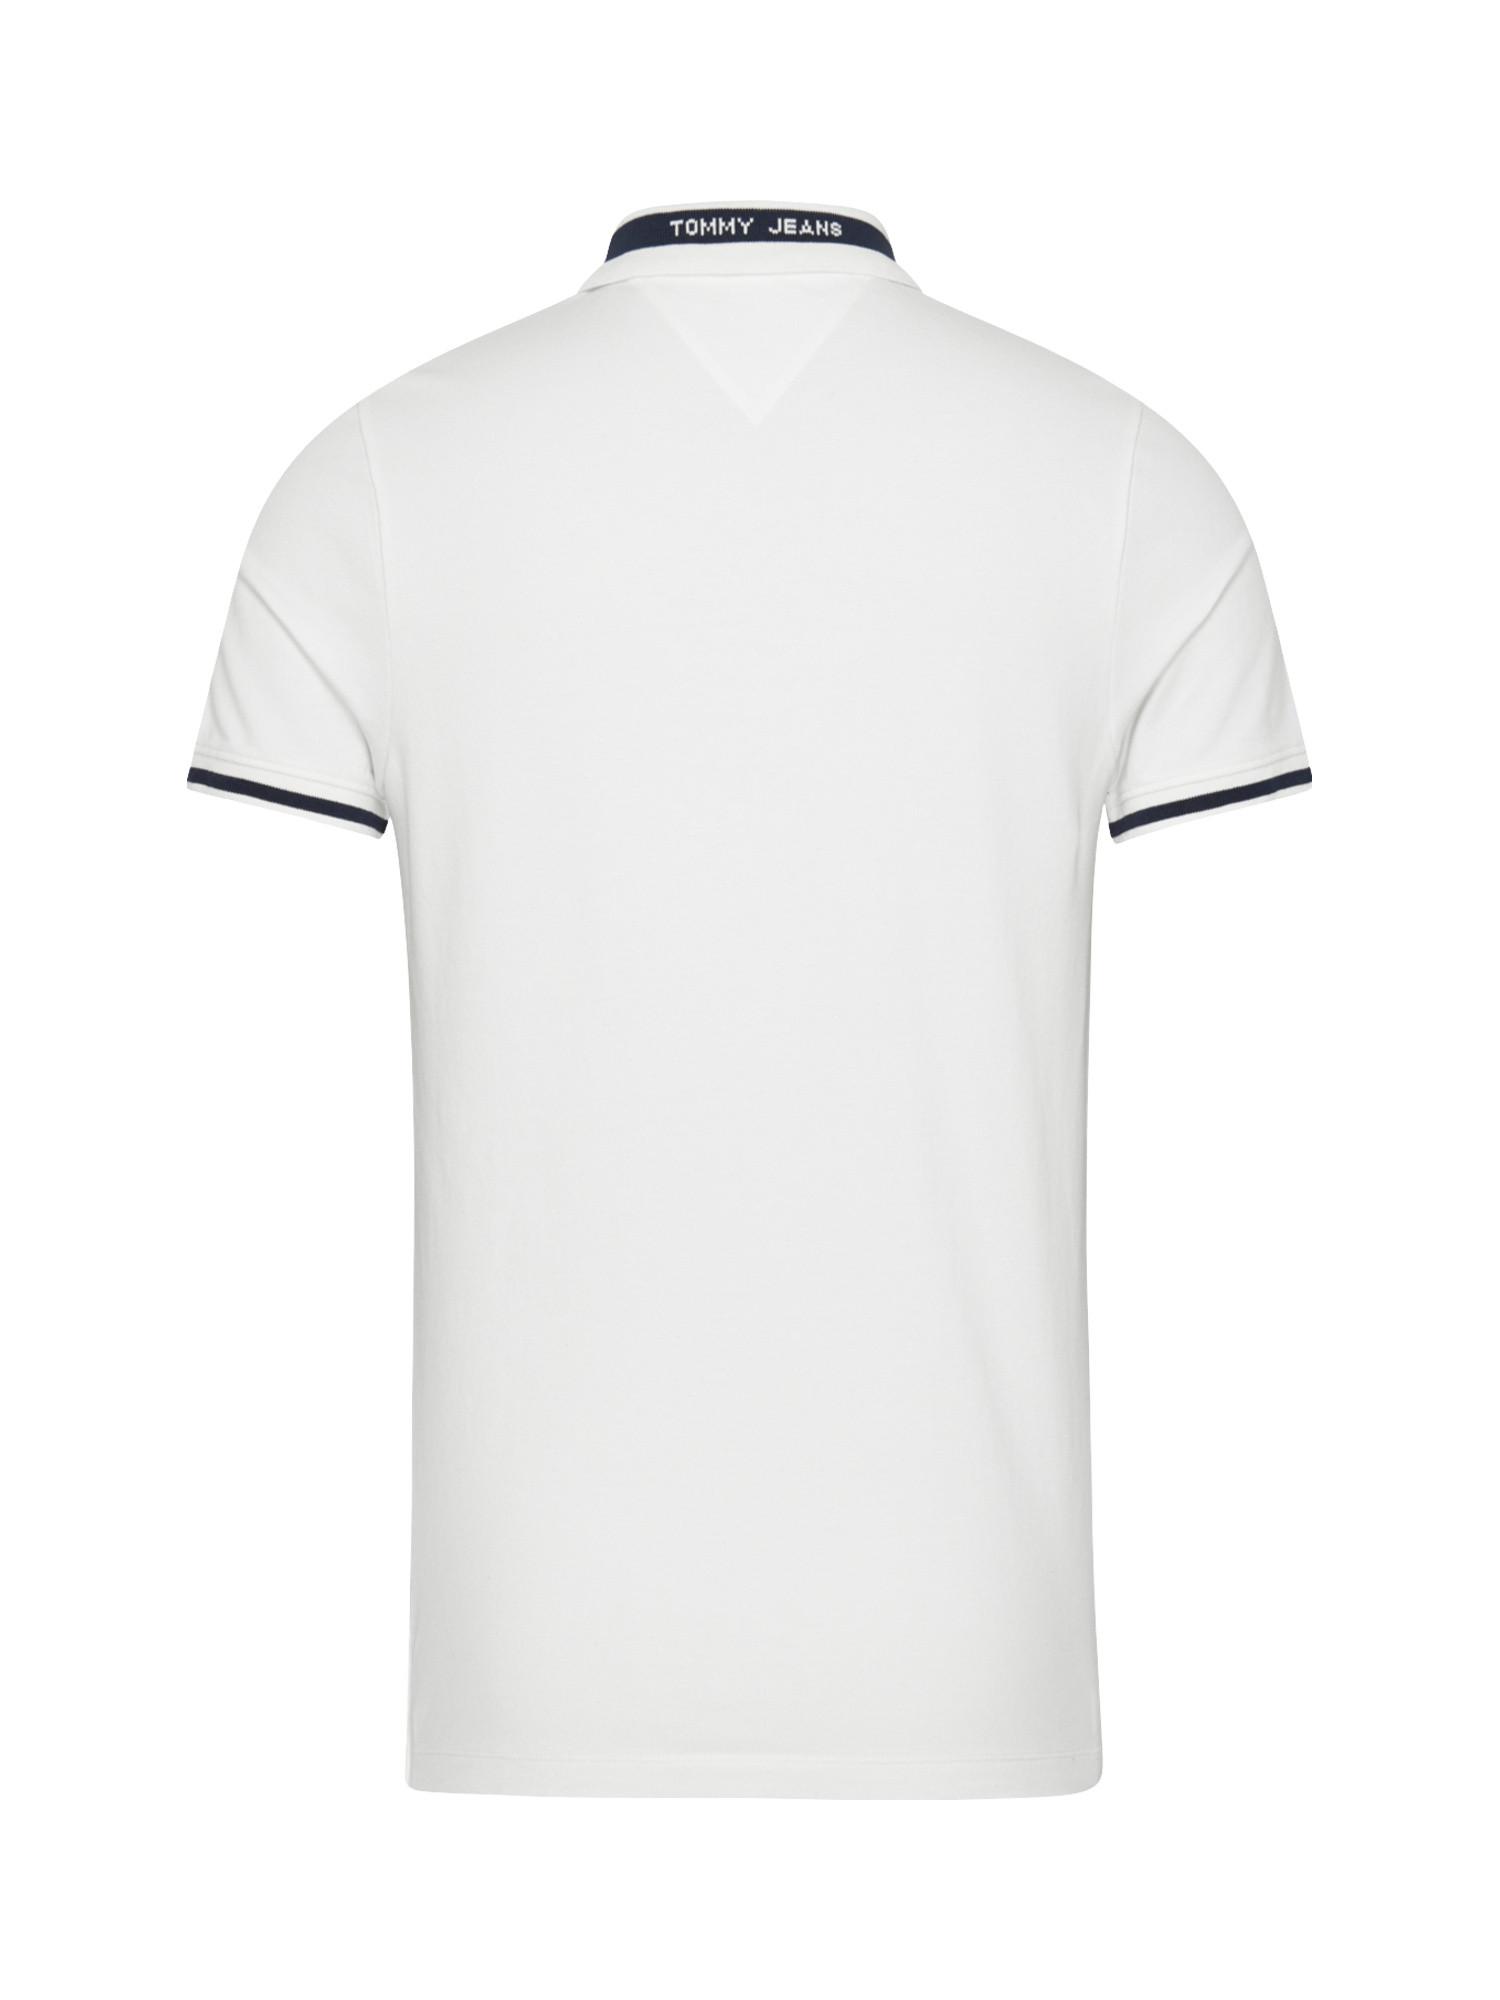 Stretch polo shirt, White, large image number 1